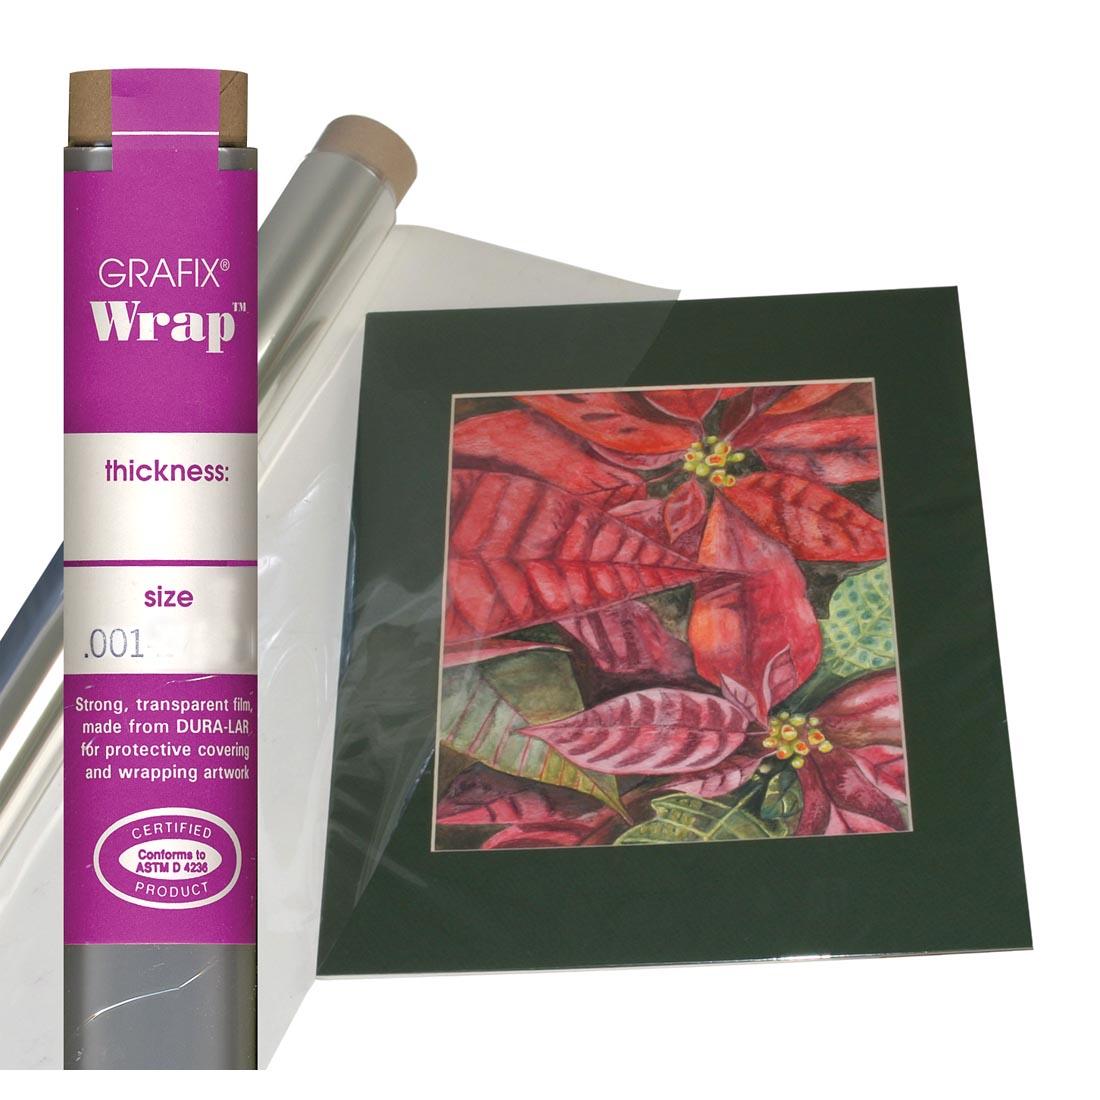 Grafix Wrap Roll in packaging plus one roll shown ready to cover a piece of artwork